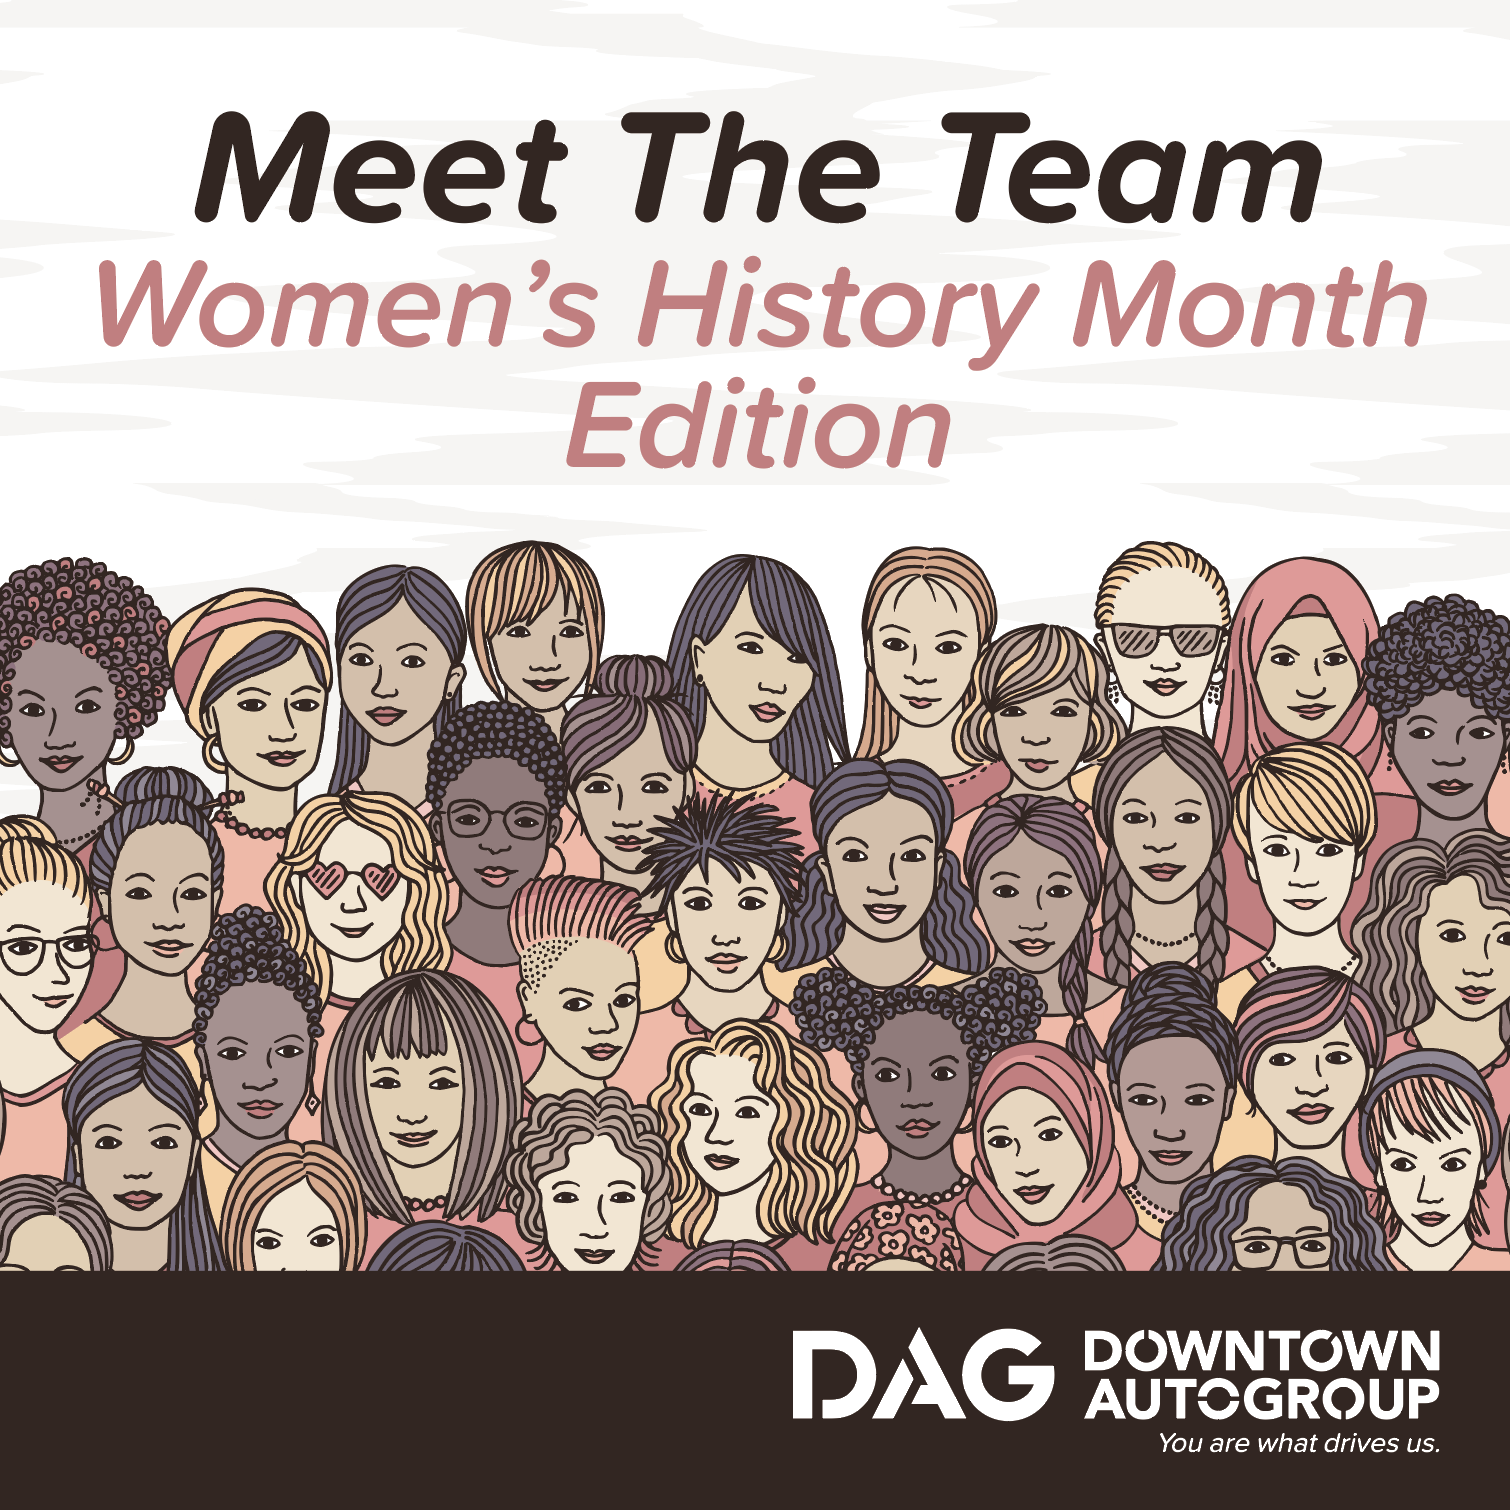 Meet the Team - Women's History Month Edition